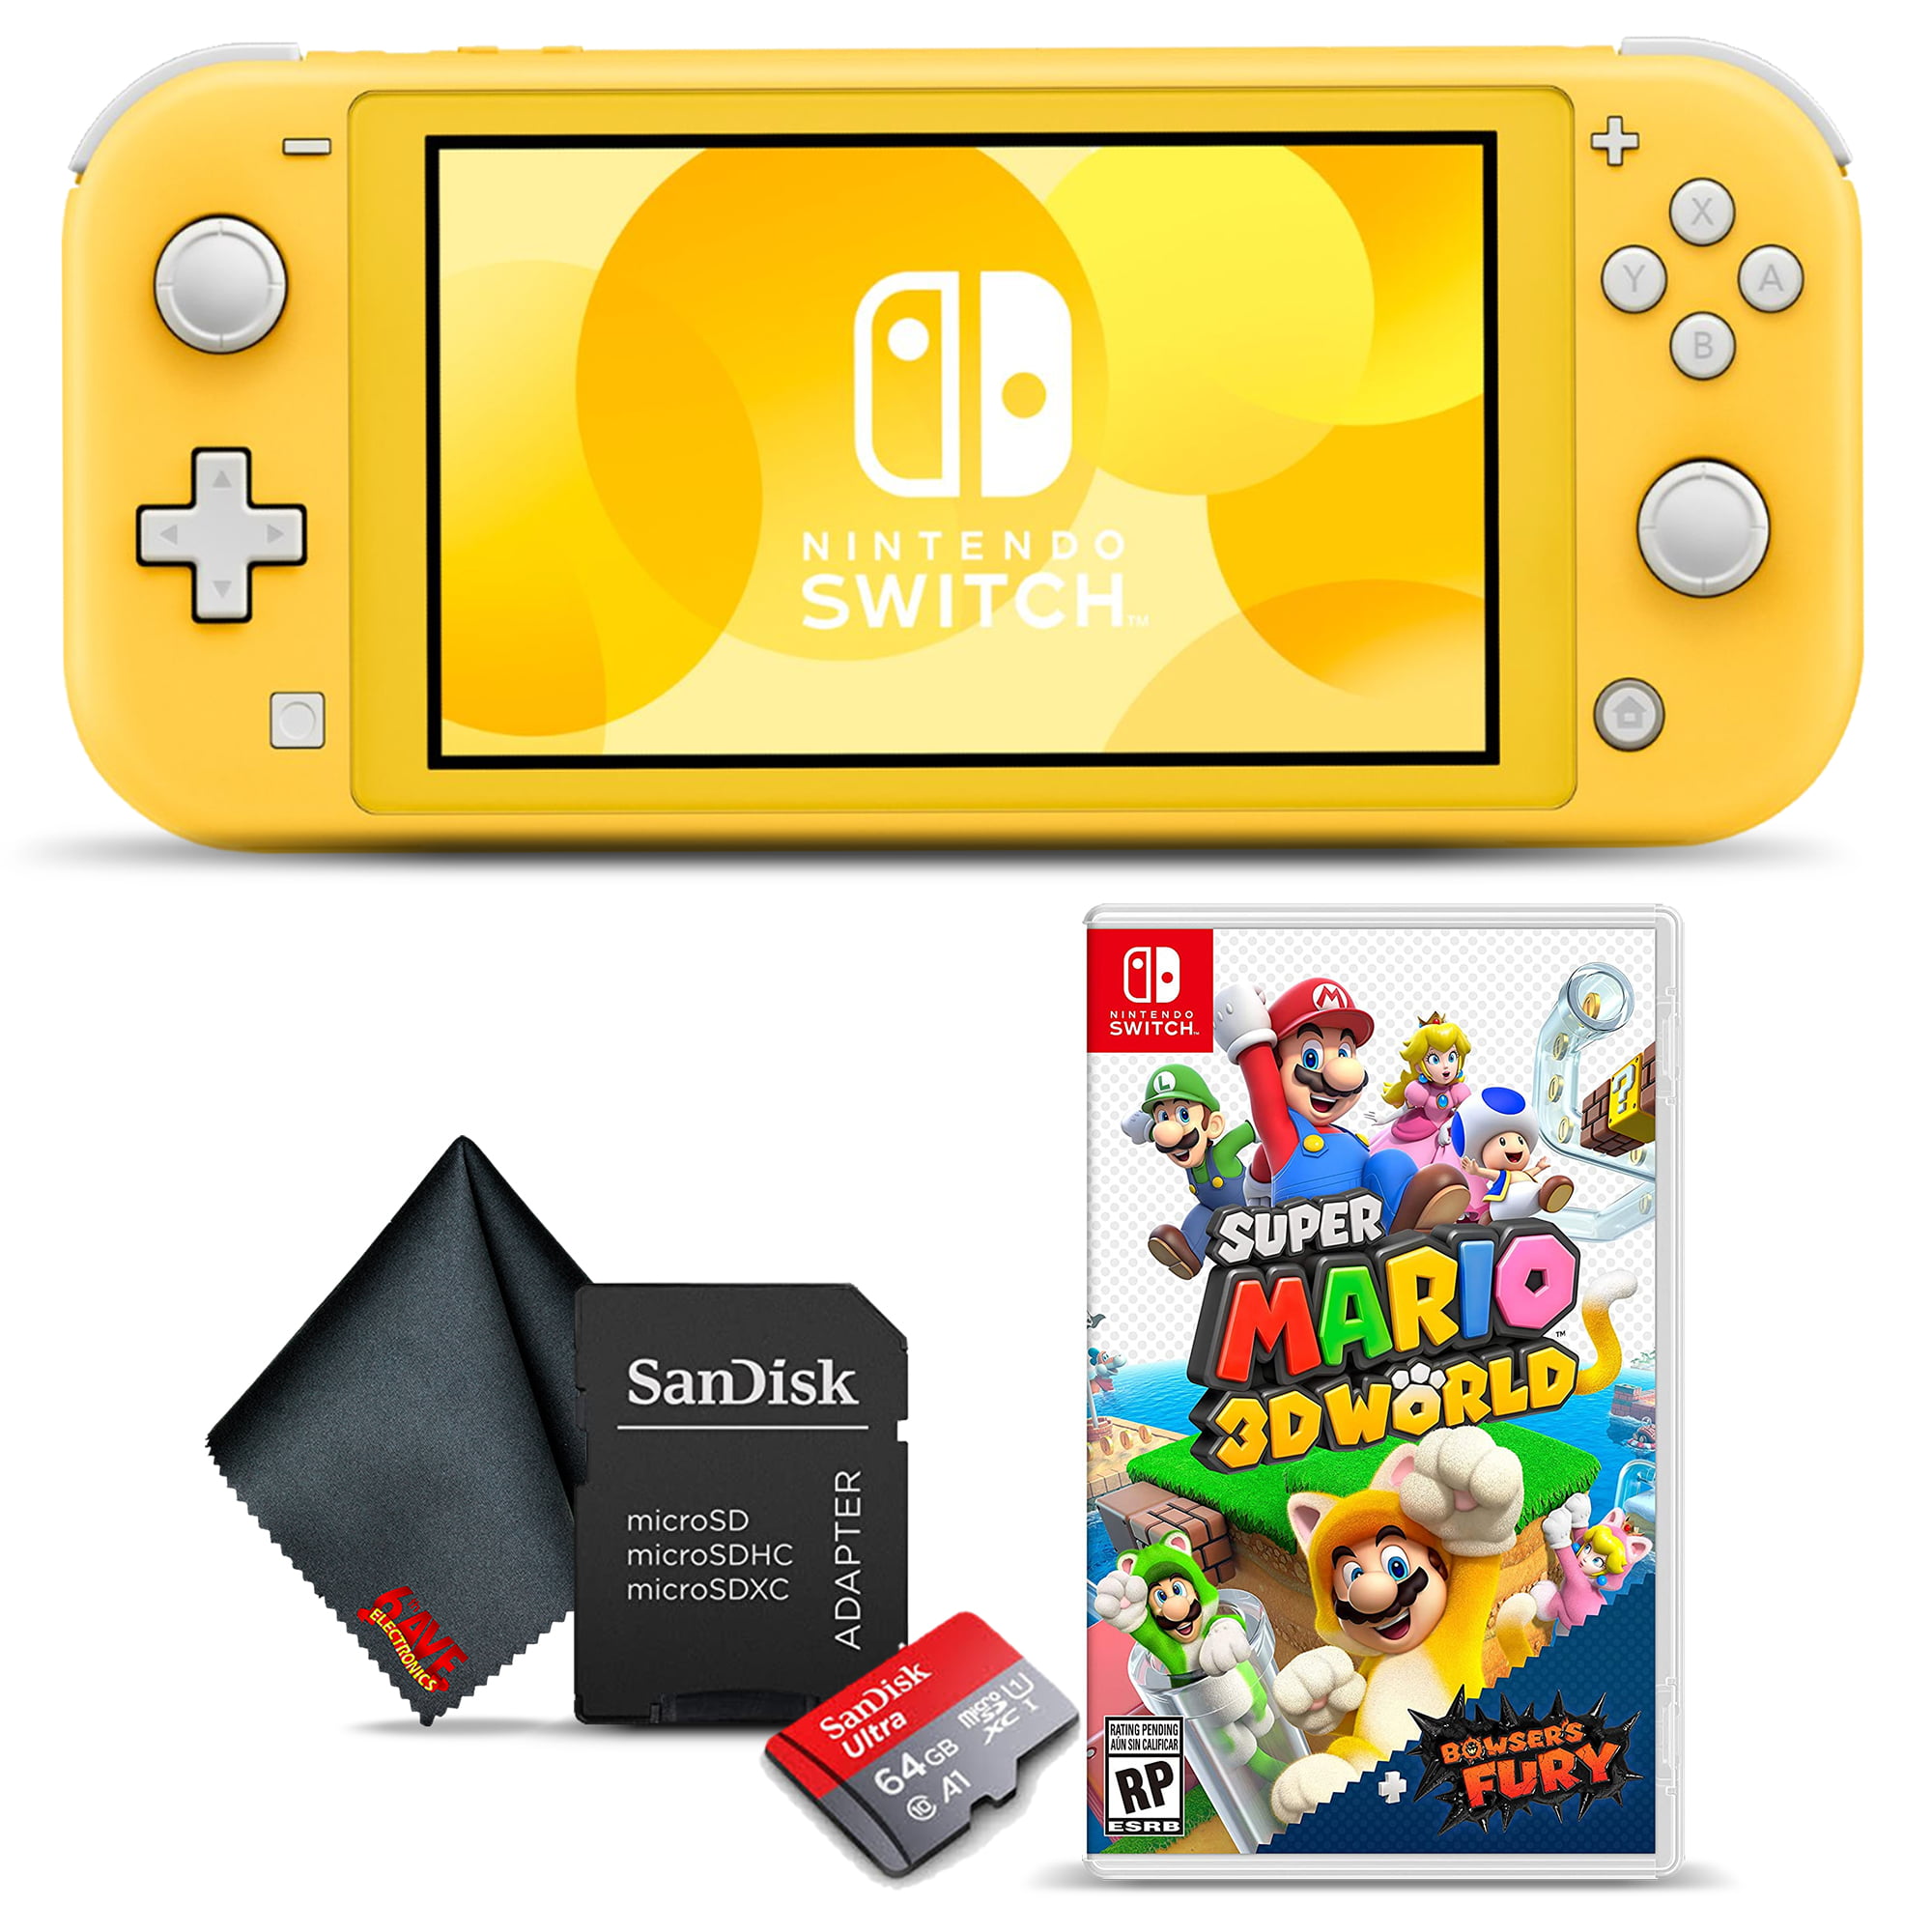 Nintendo Switch Lite (Coral) with Super Mario 3D World + Bowser's